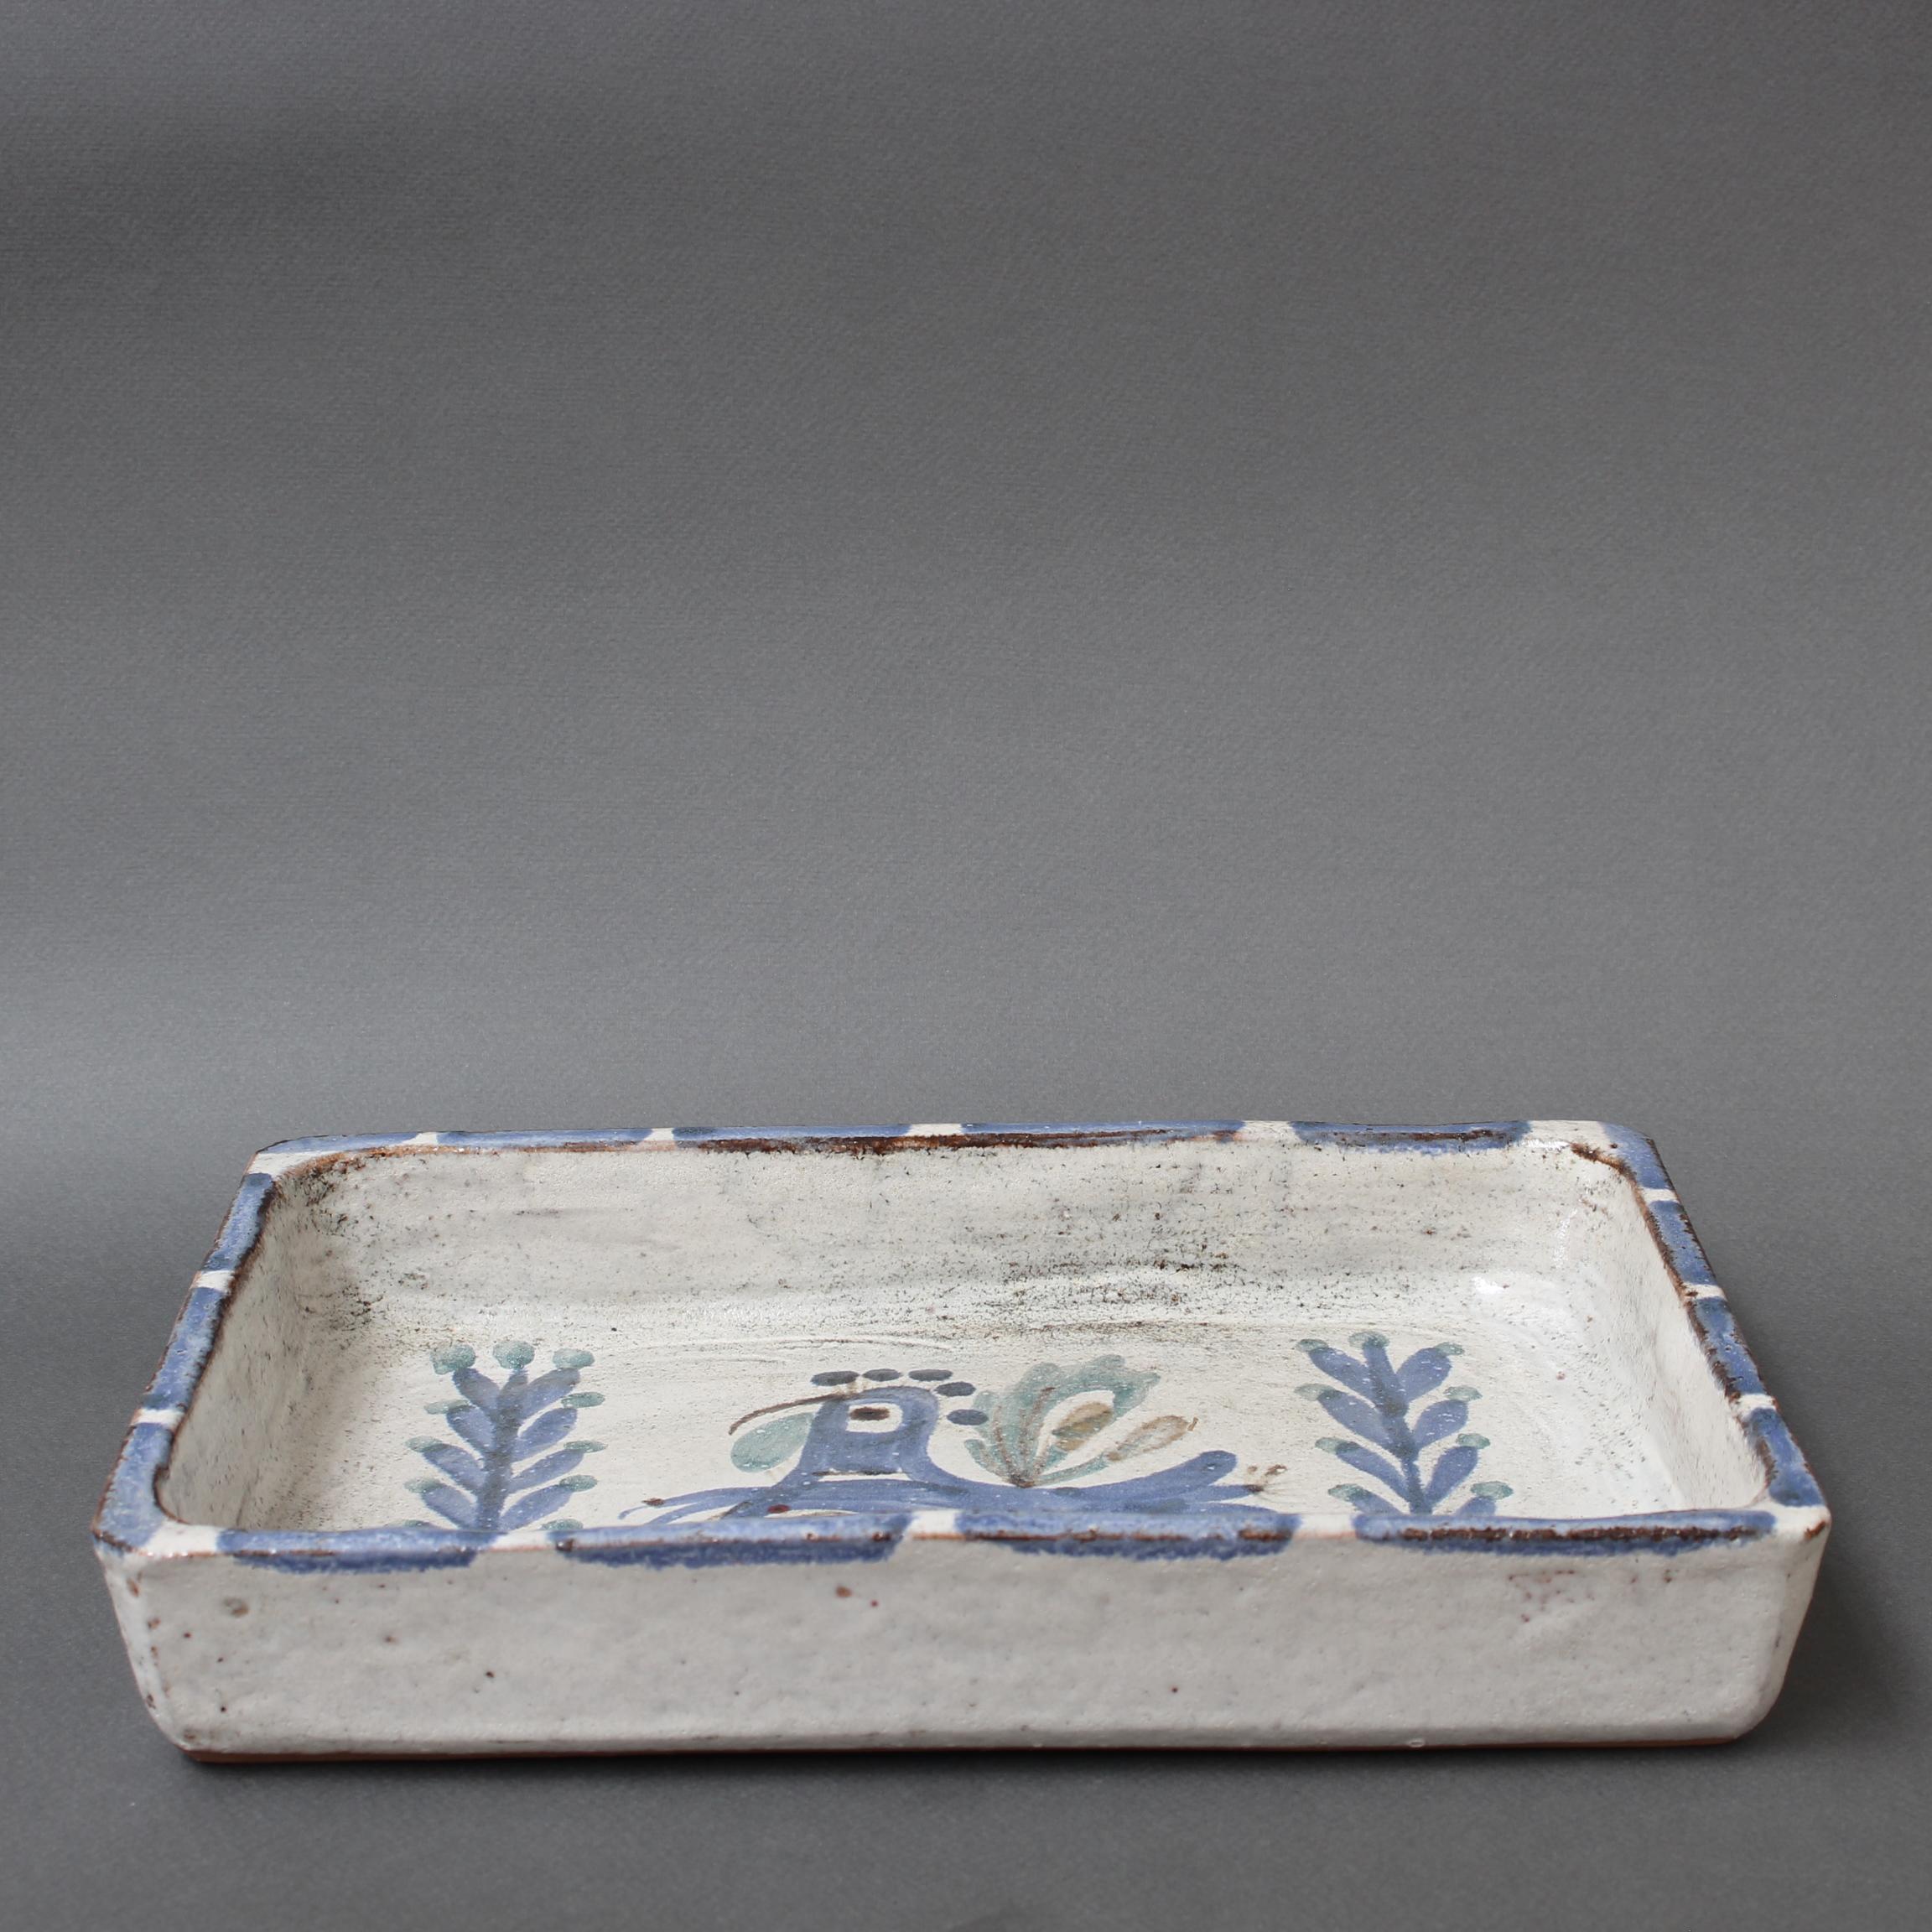 Vintage French Ceramic Tray by Gustave Reynaud for Le Mûrier (circa 1960s) For Sale 7